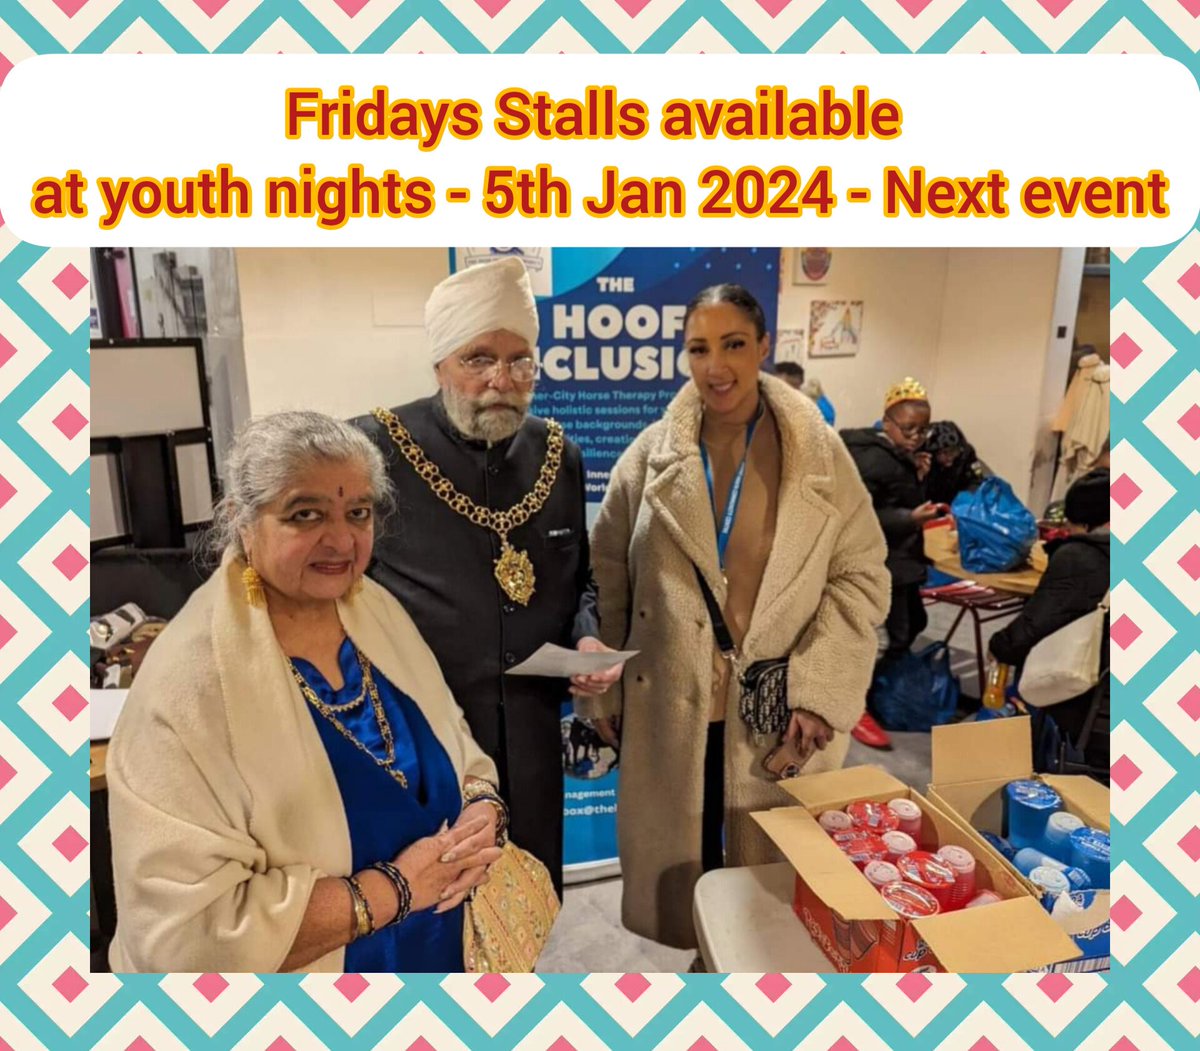 We are so excited at @fridays.coventry to host youth clubs every 1st Fridays of the month at the 2 Tone Village from 6-8pm 🎉 Please come down all young people under 18  🙏🏽  Stalls and businesses are welcome to promote their products 
#fridays #fridayscoventry #fyp